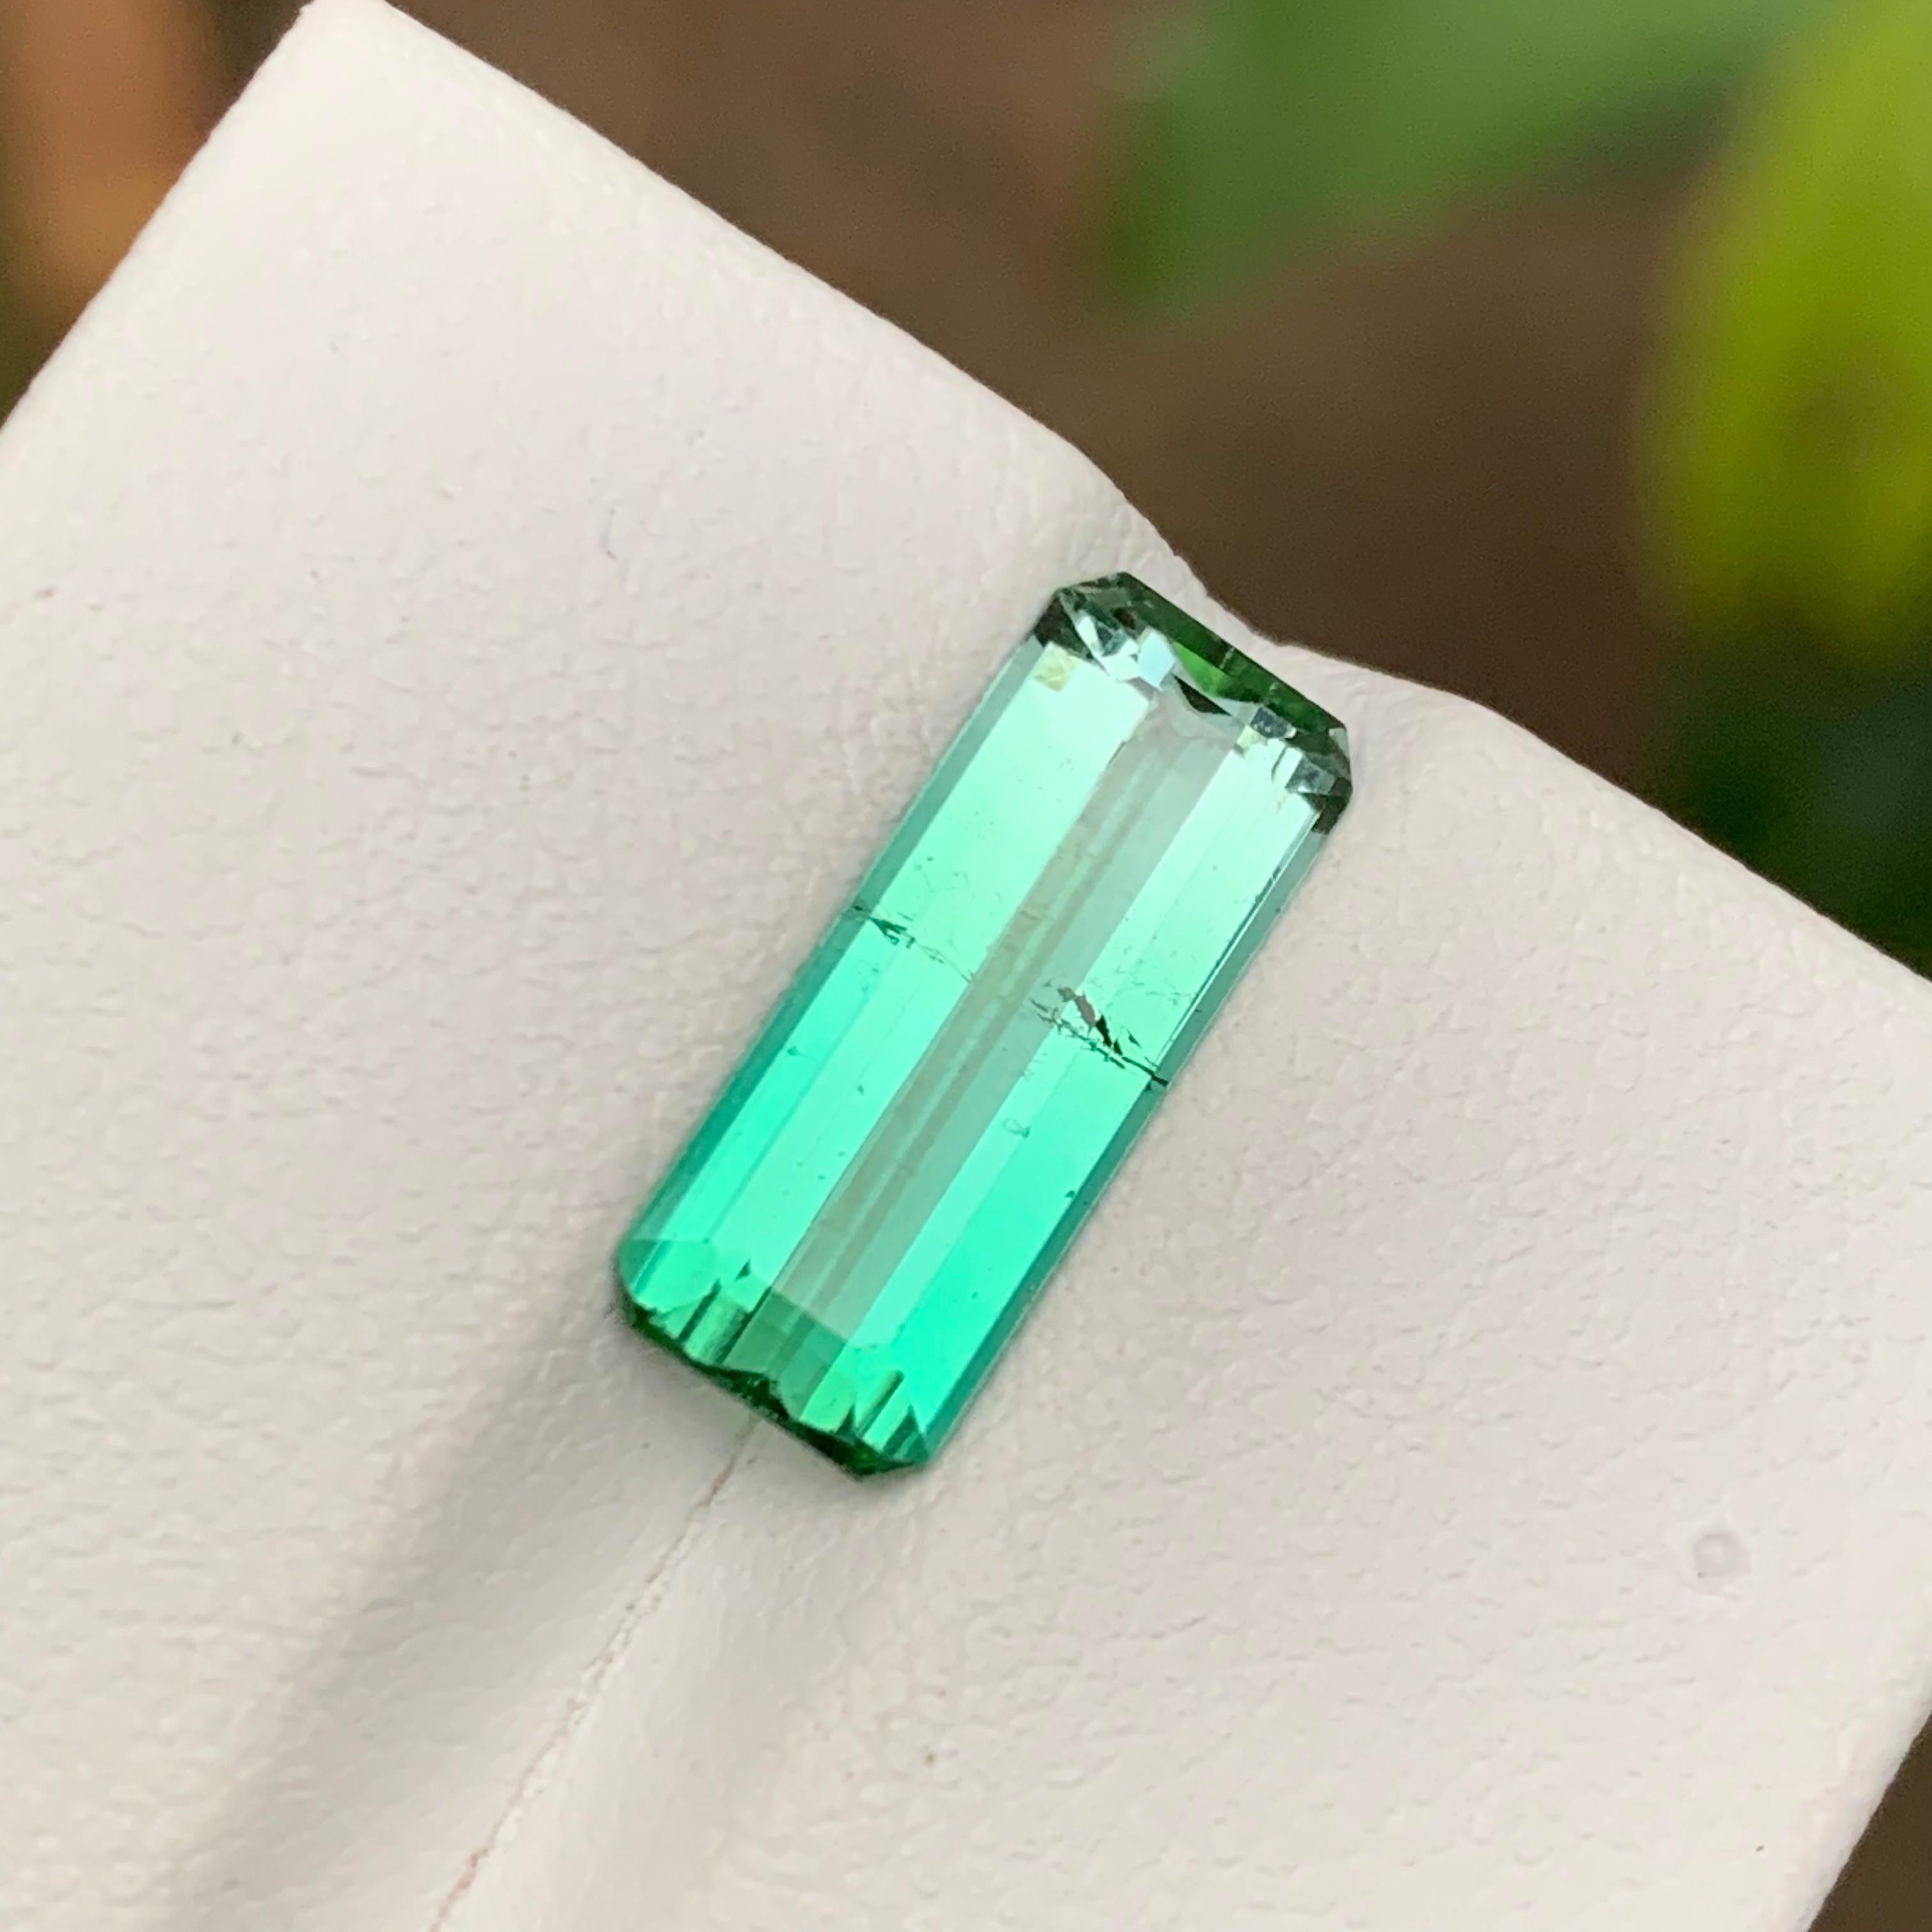 GEMSTONE TYPE: Tourmaline
PIECE(S): 1
WEIGHT: 2.90 Carats
SHAPE: Emerald
SIZE (MM): 14.45 x 5.84 x 3.73
COLOR: Neon Bluish Green
CLARITY: Slightly Included 
TREATMENT: None
ORIGIN: Afghanistan
CERTIFICATE: On demand

Introducing our exquisite 2.90